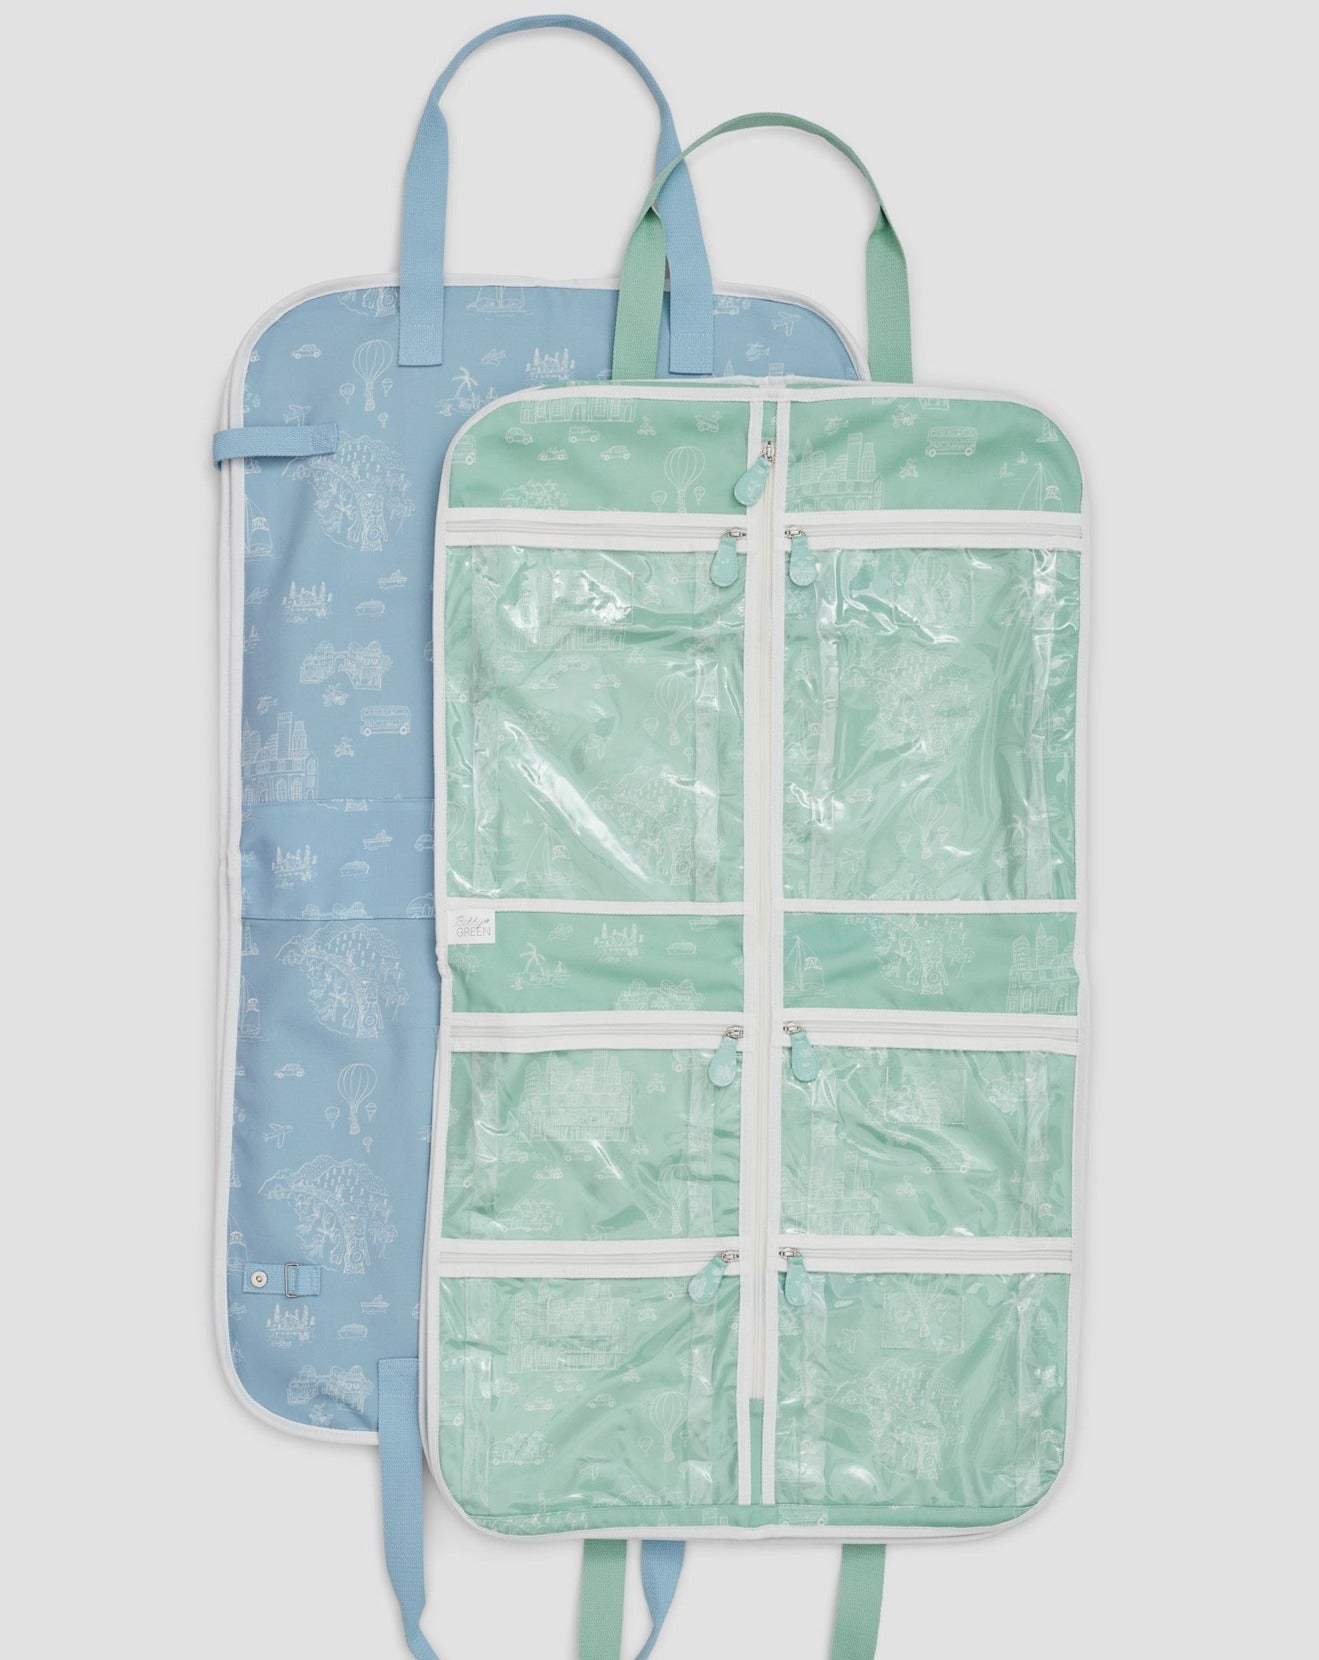 Hanging garment bags with six clear pockets. Blue and Green colorways.